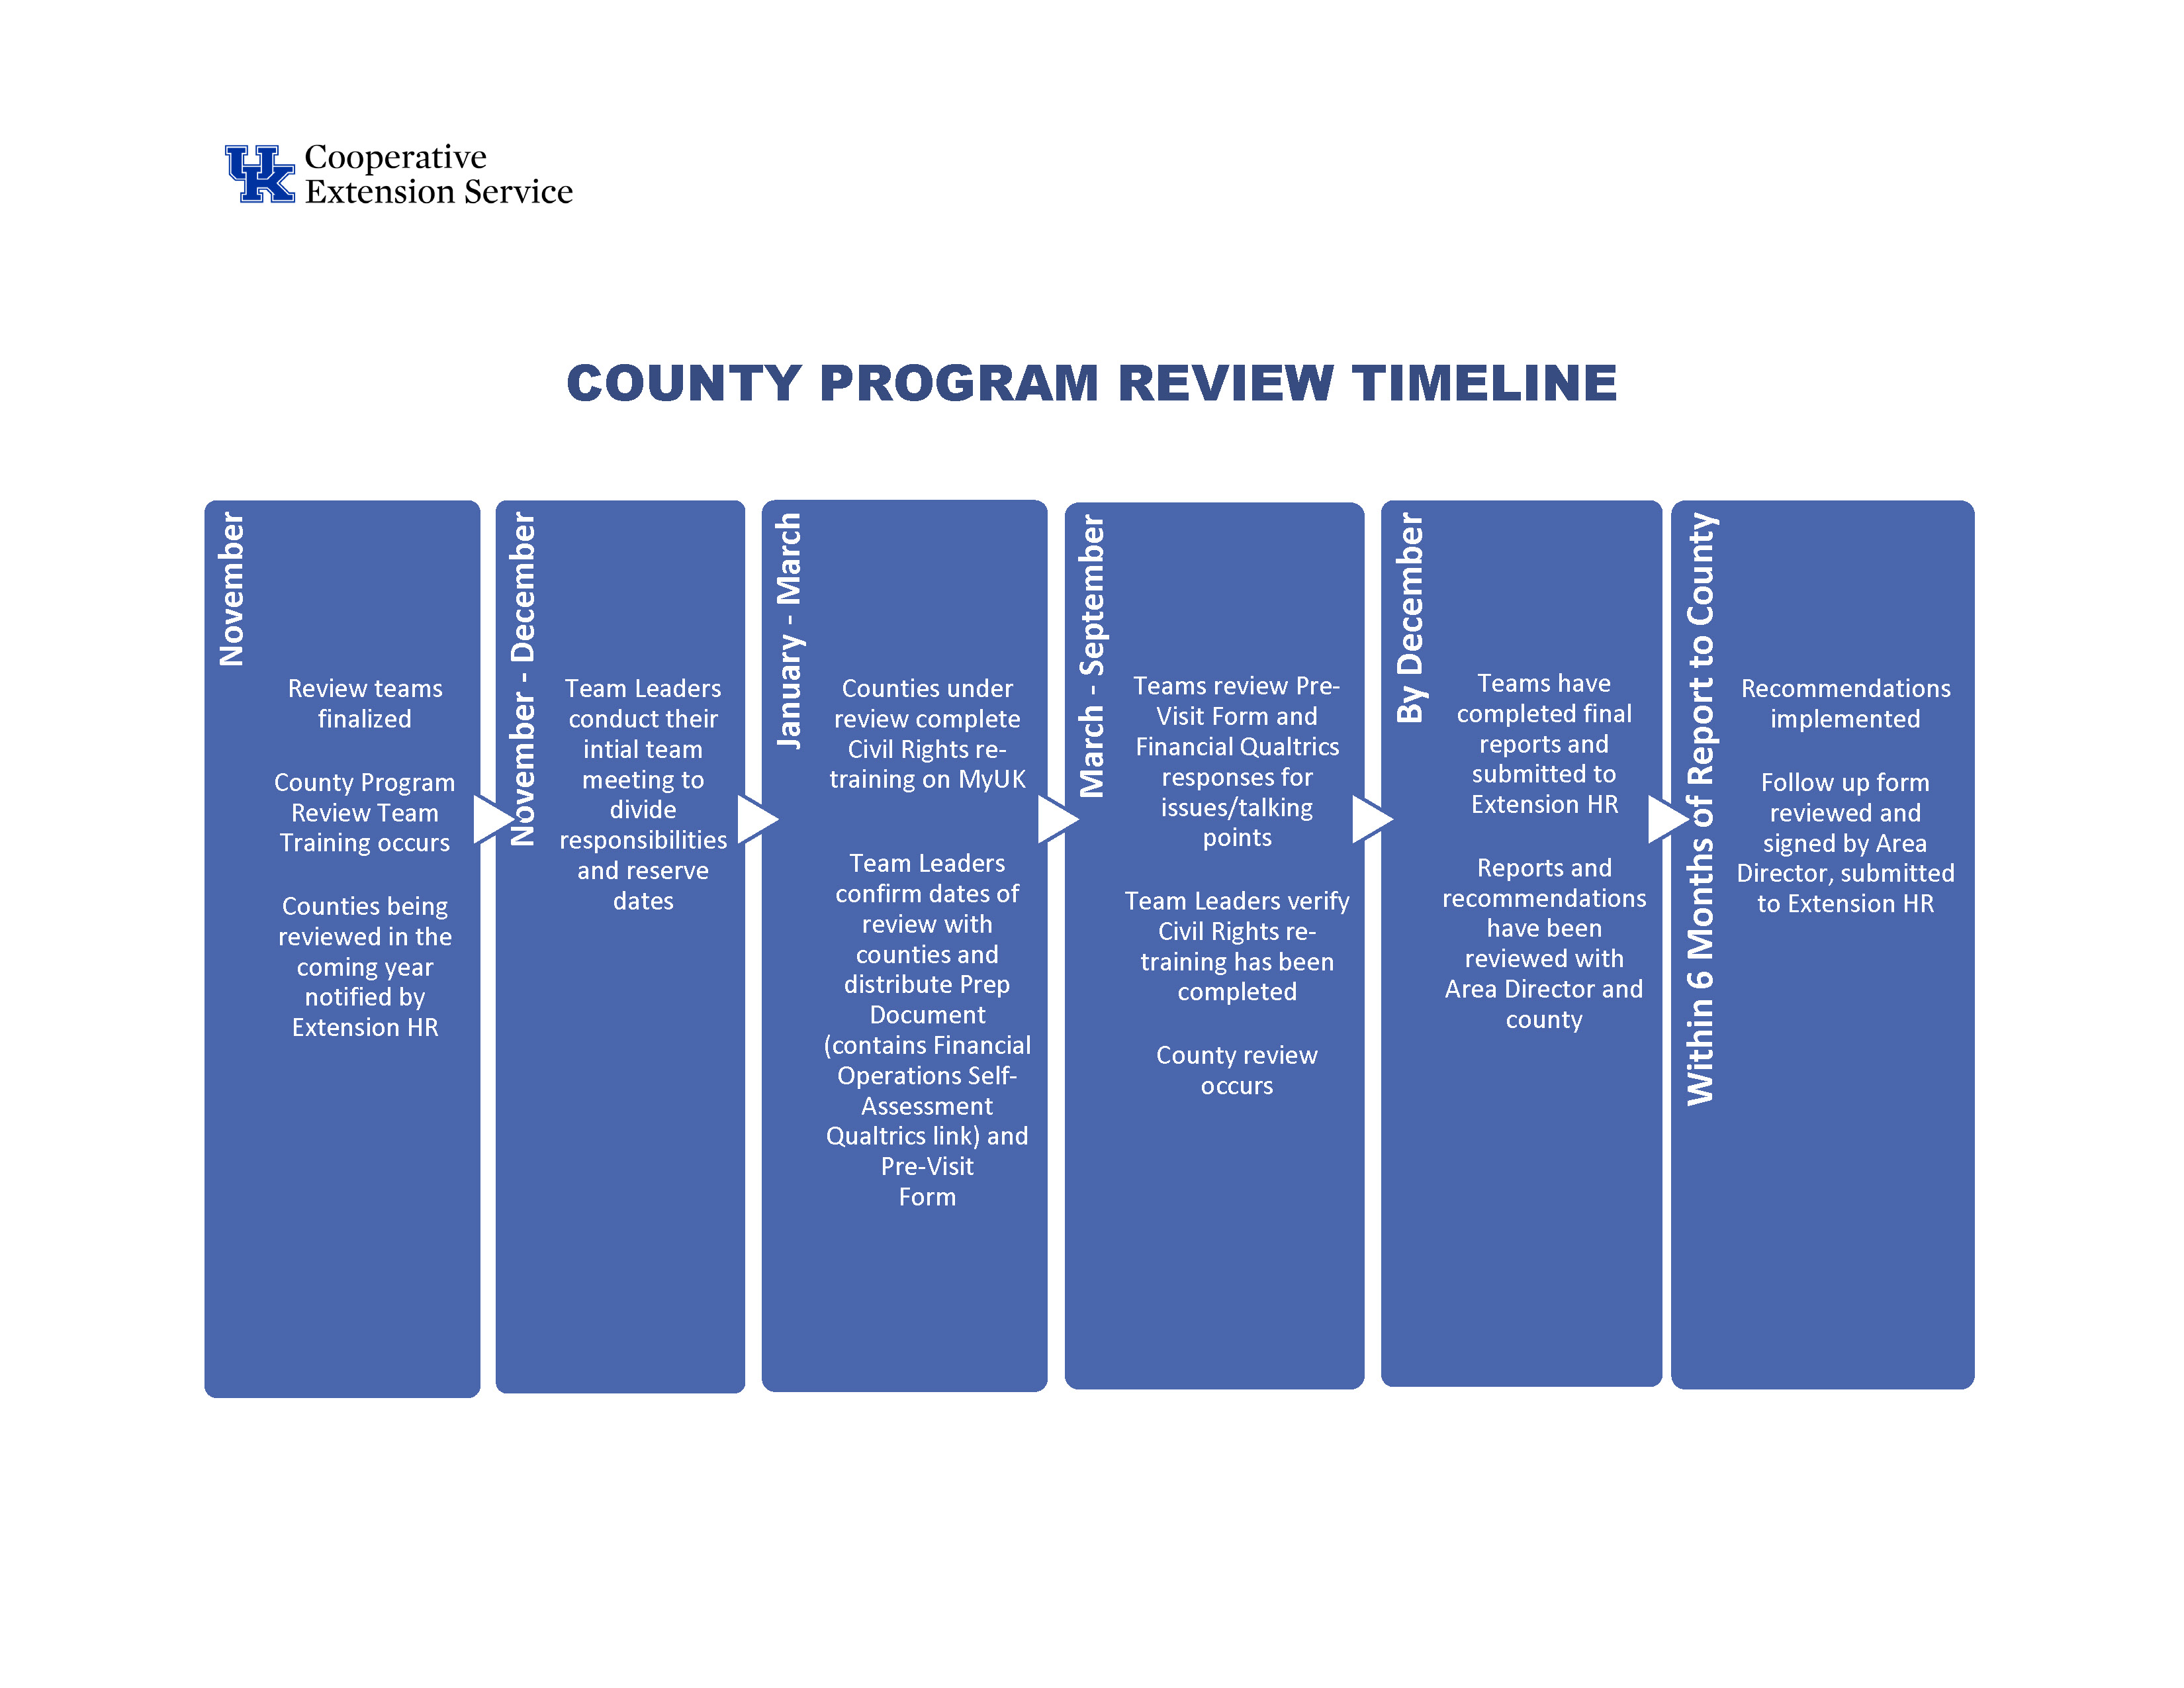 Timeline of review process